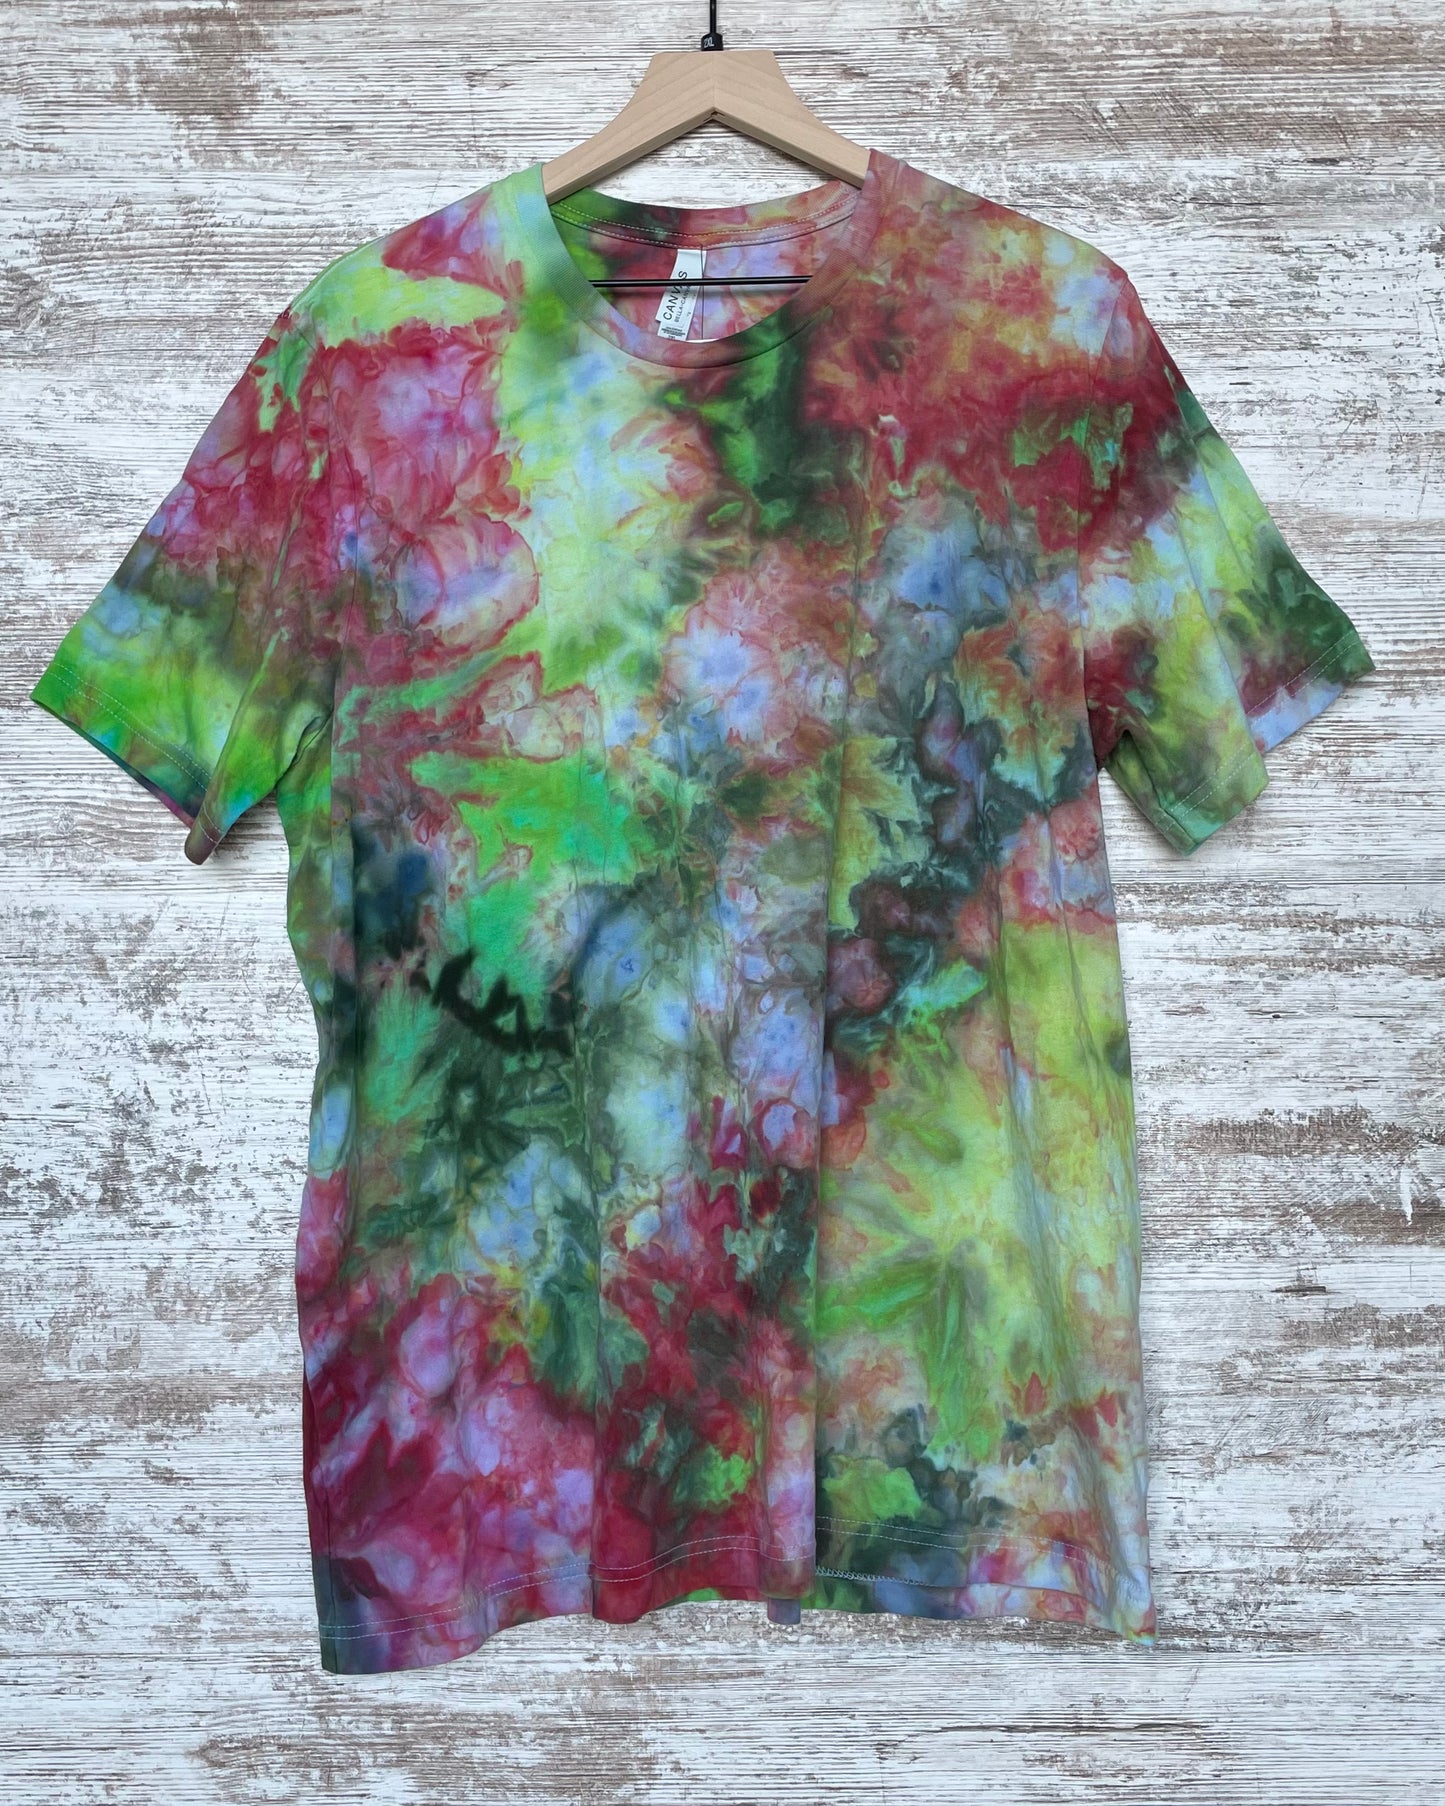 Unisex Adult Ice-Dyed T-shirt Red & Green